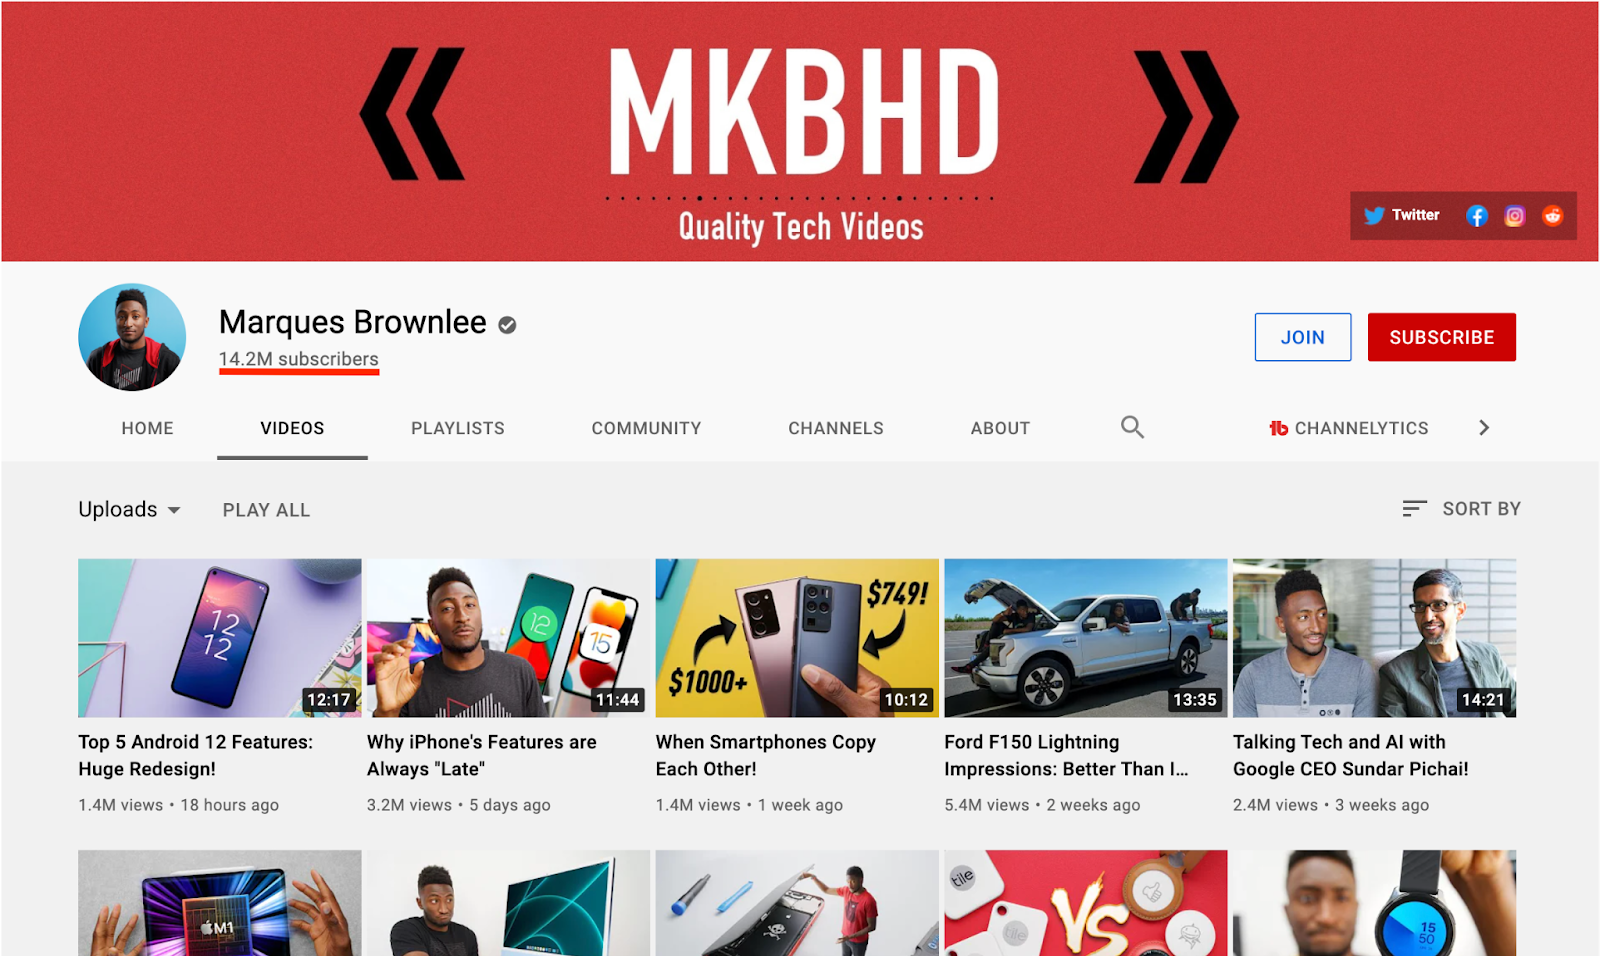 YouTube Monetization Example: Marques Brownlee (MKBHD)